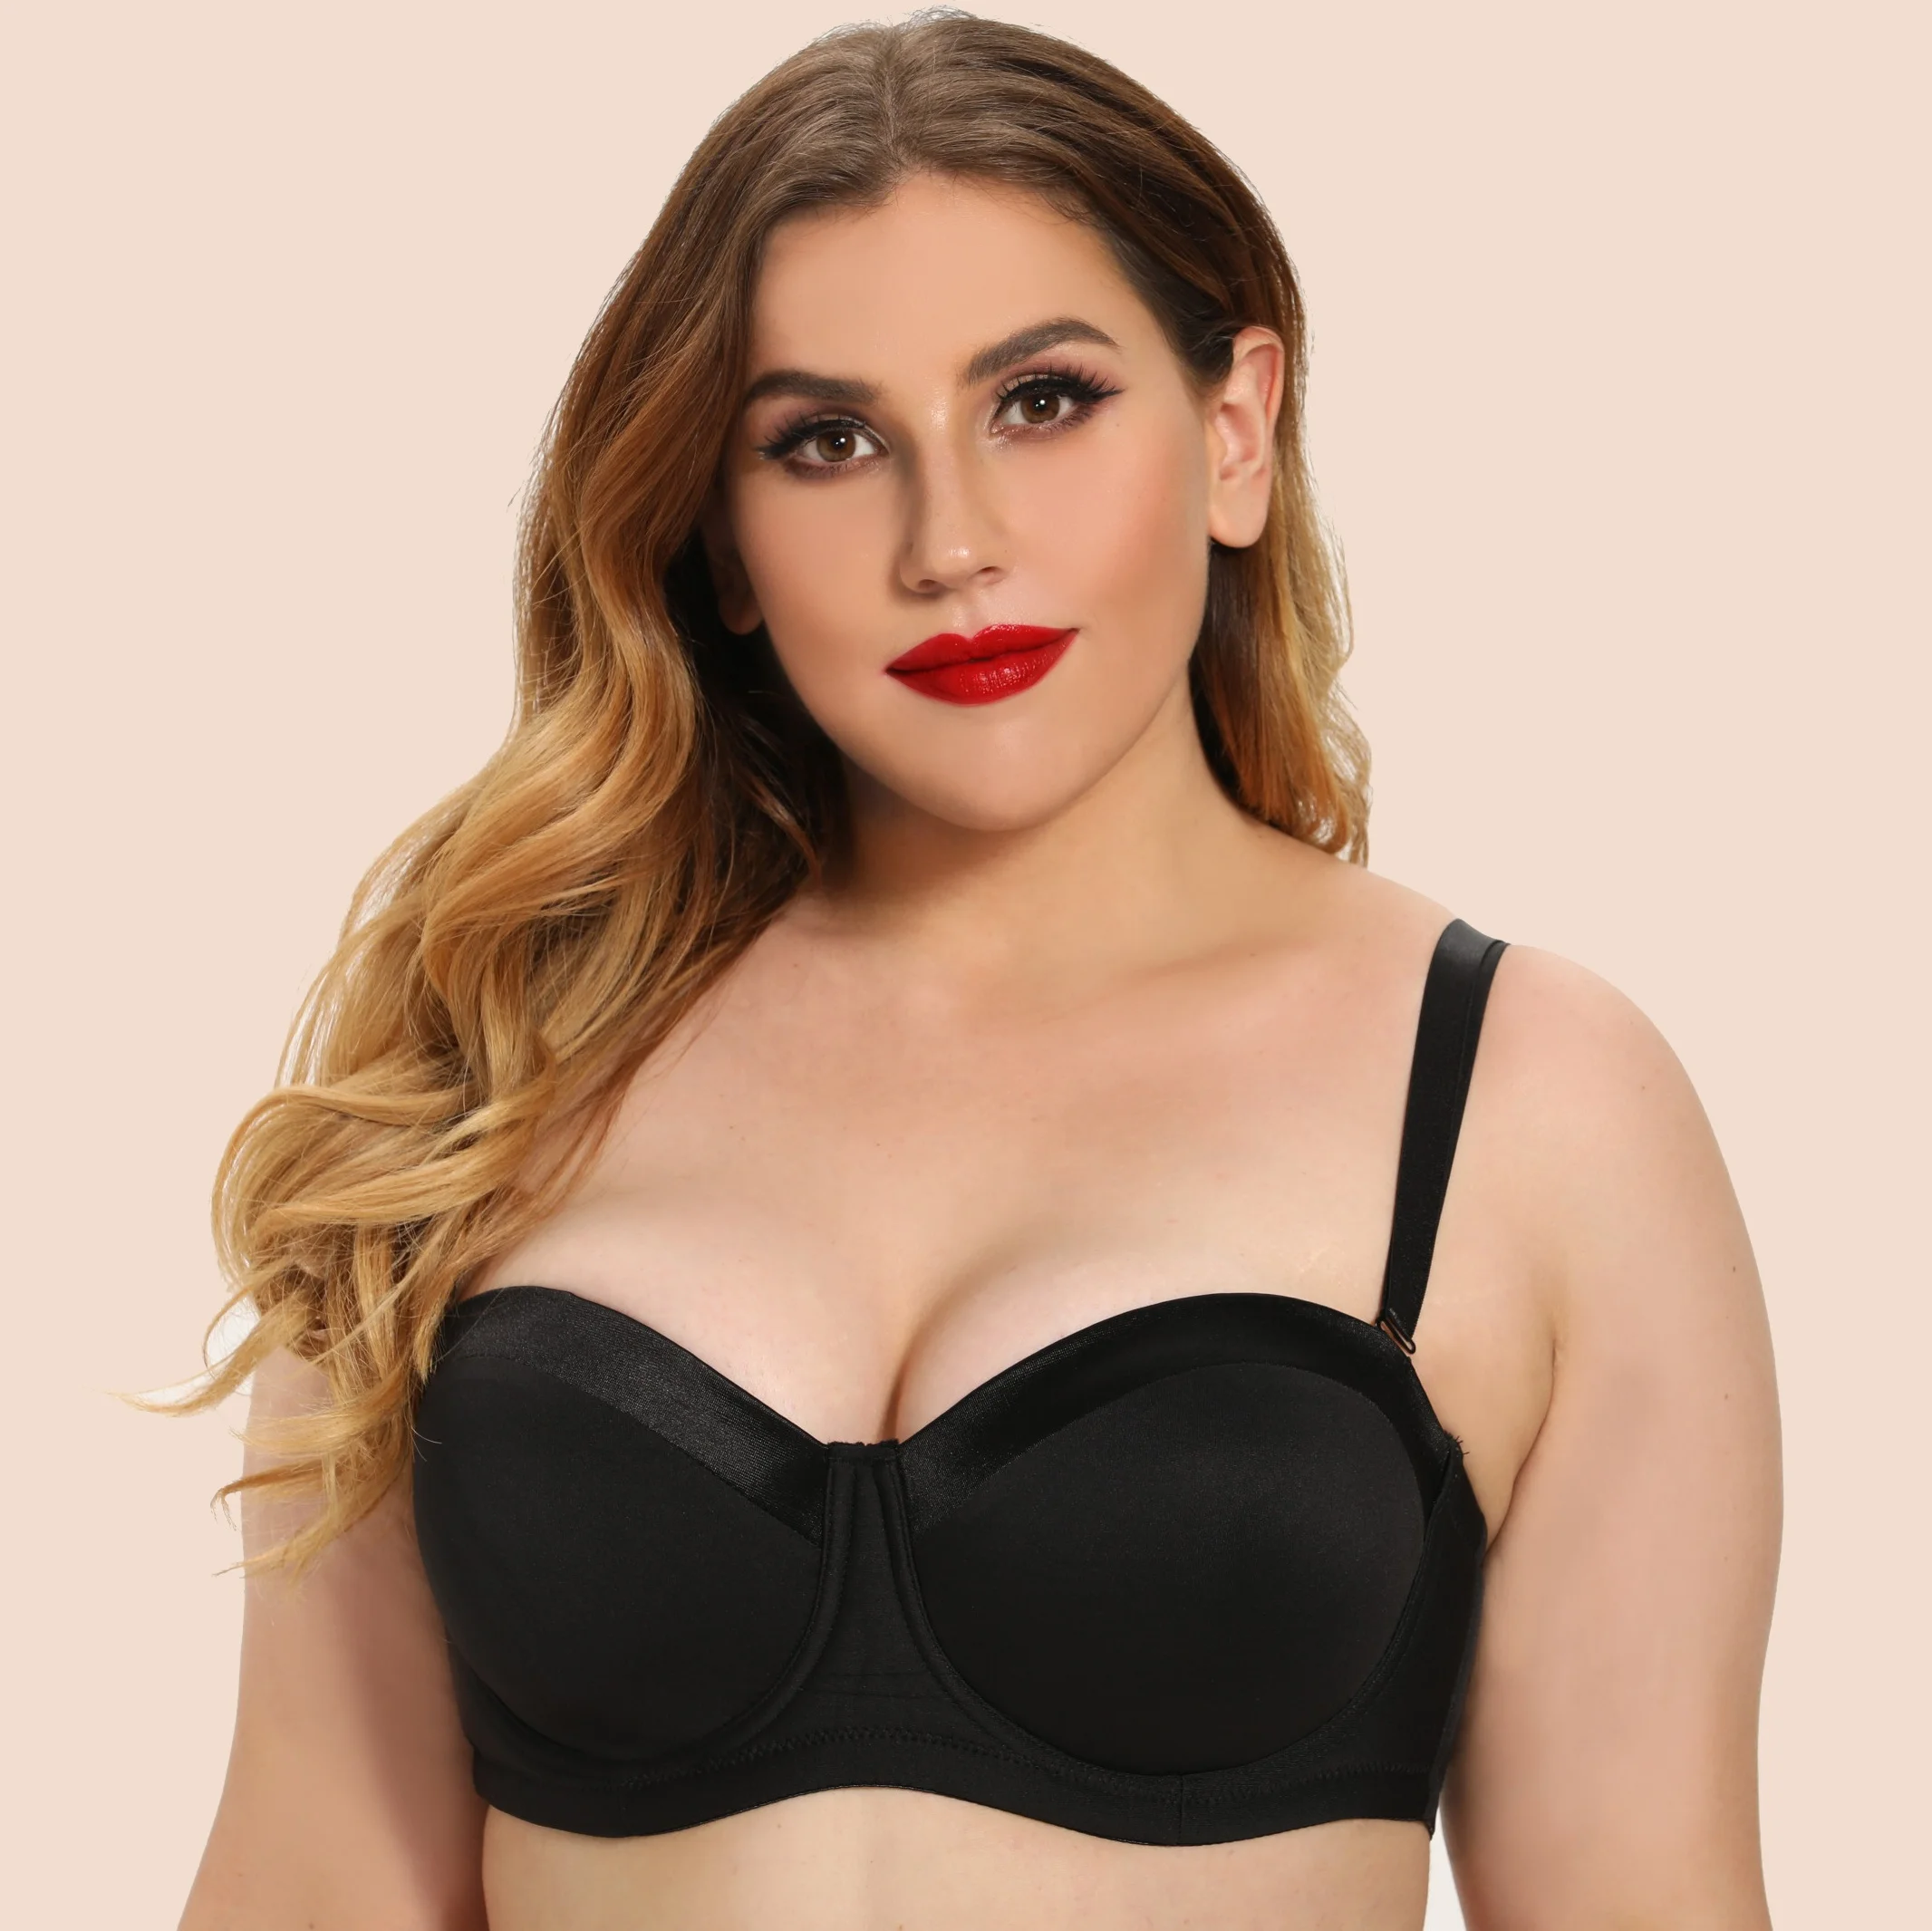 Women's Plus Size Push Up Bra with Convertible Straps